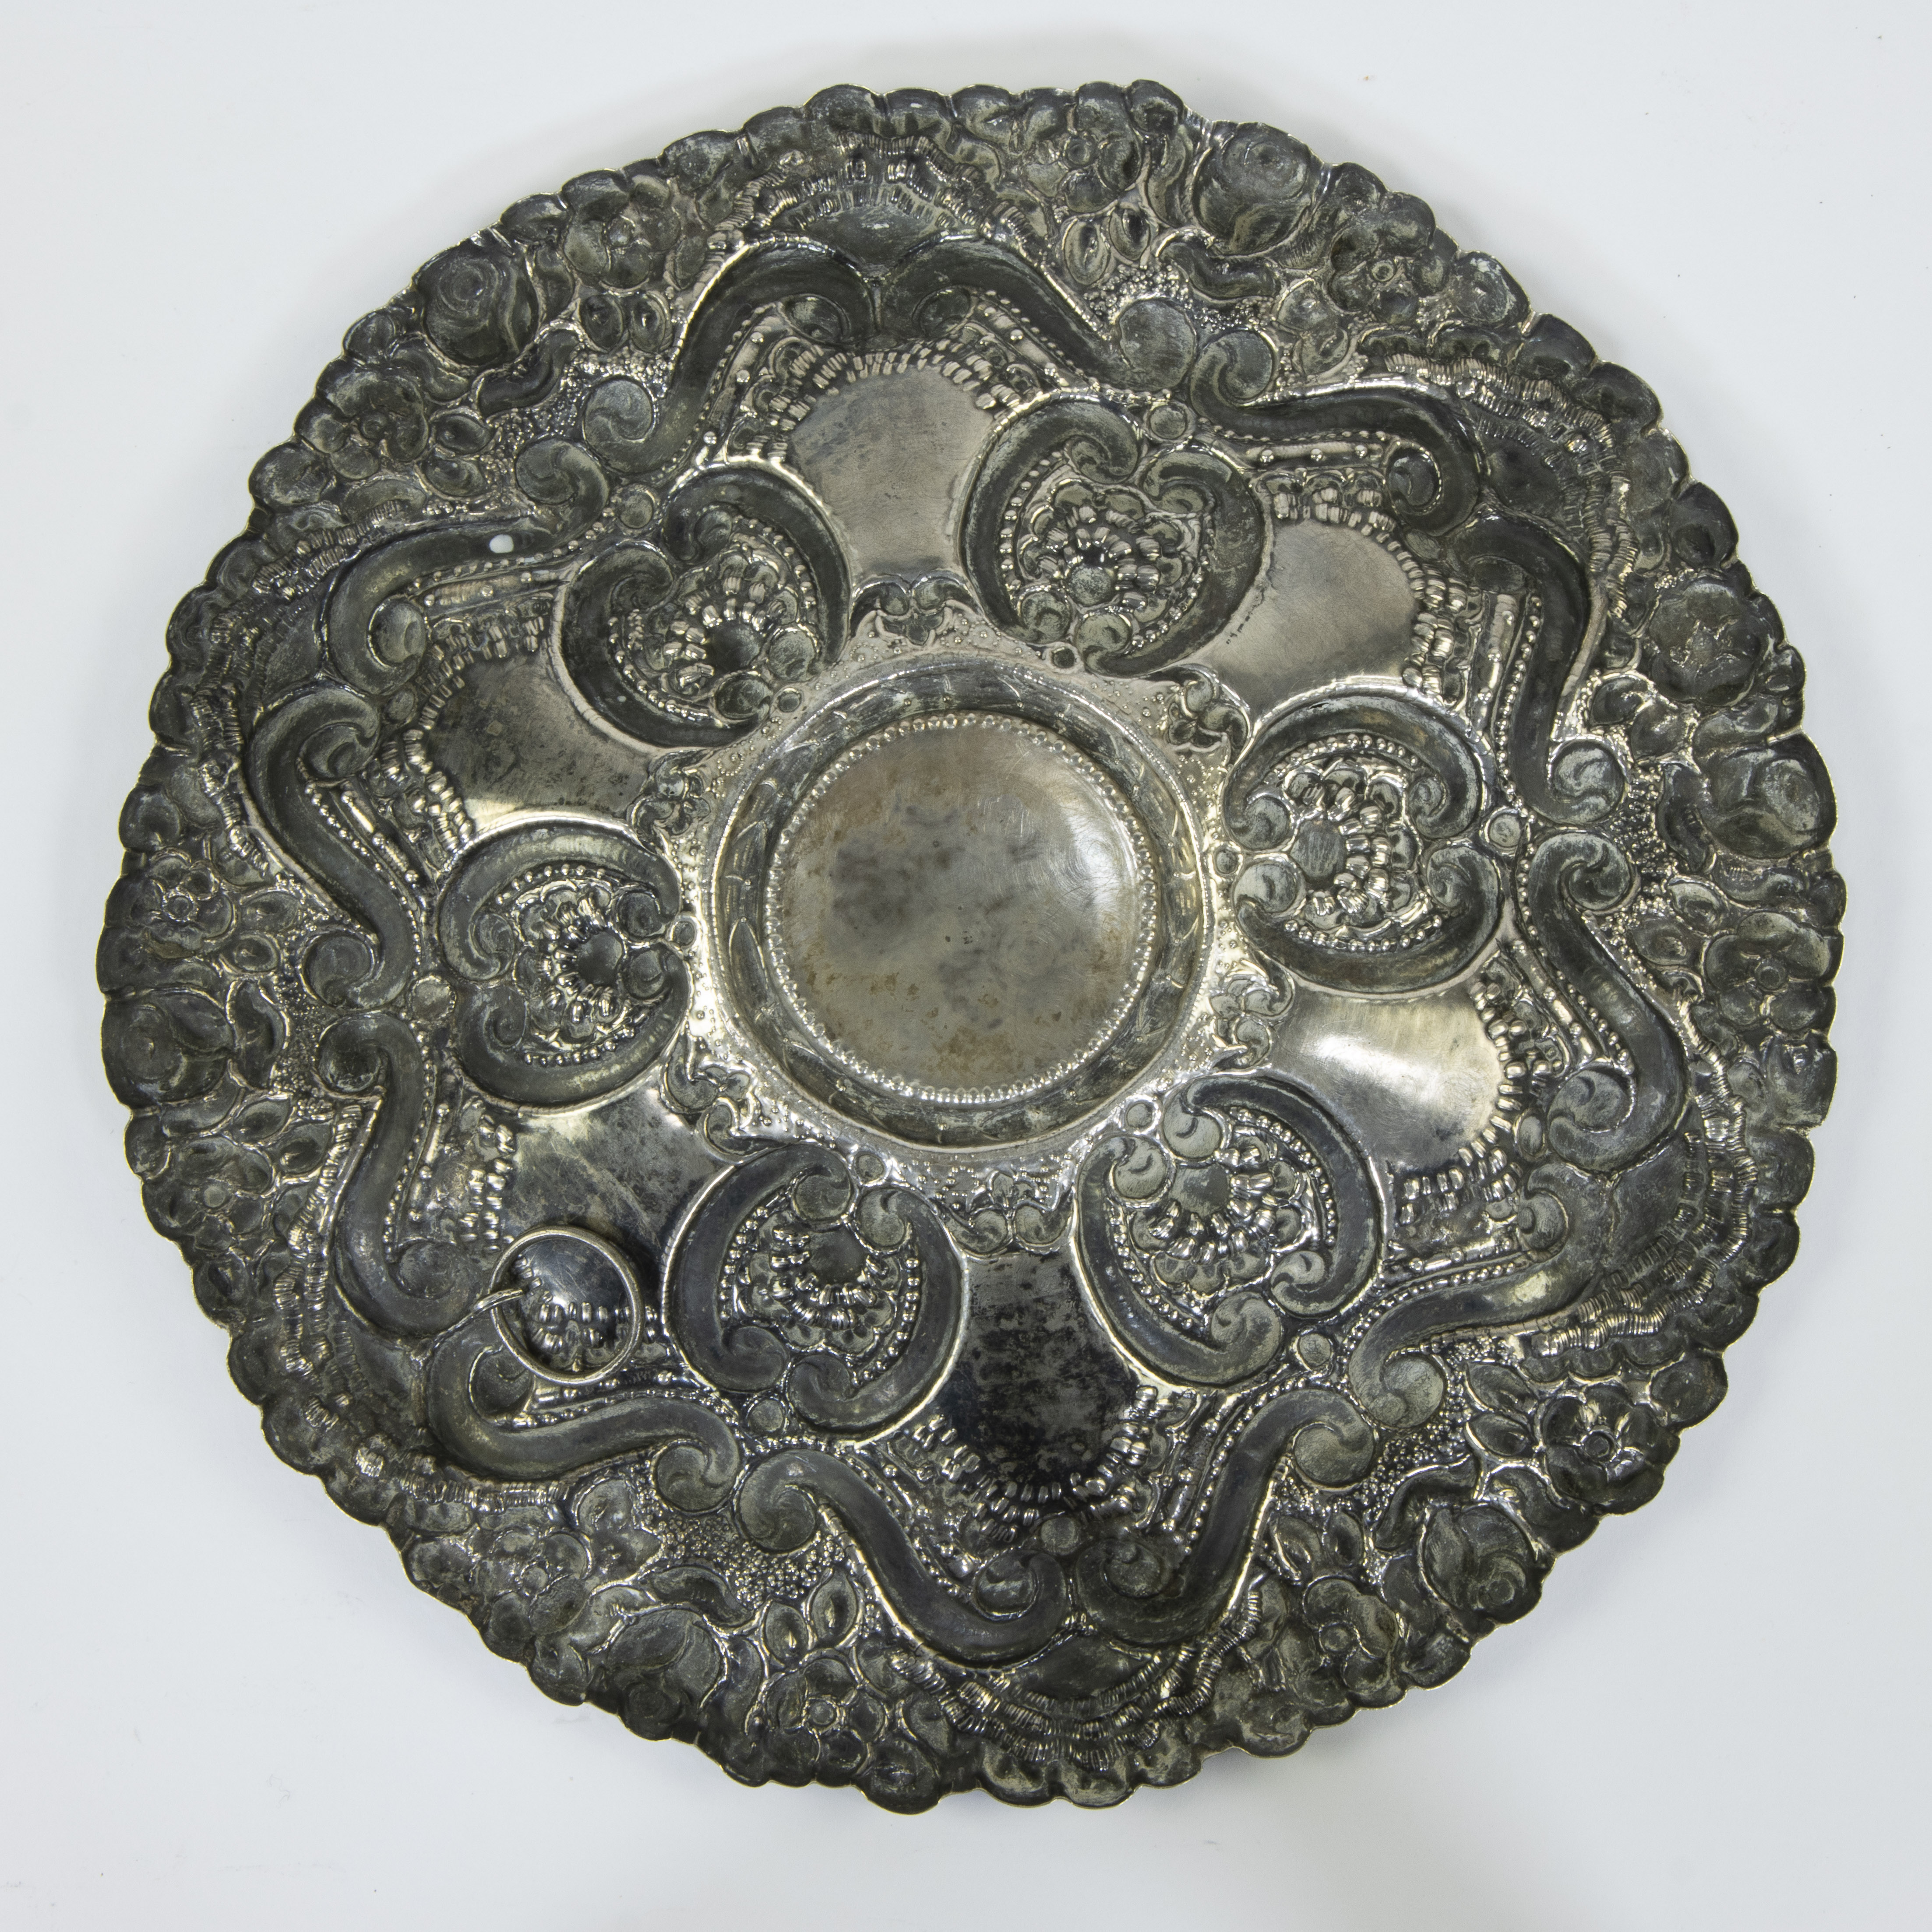 2 silver dishes, repoussé - Image 4 of 6